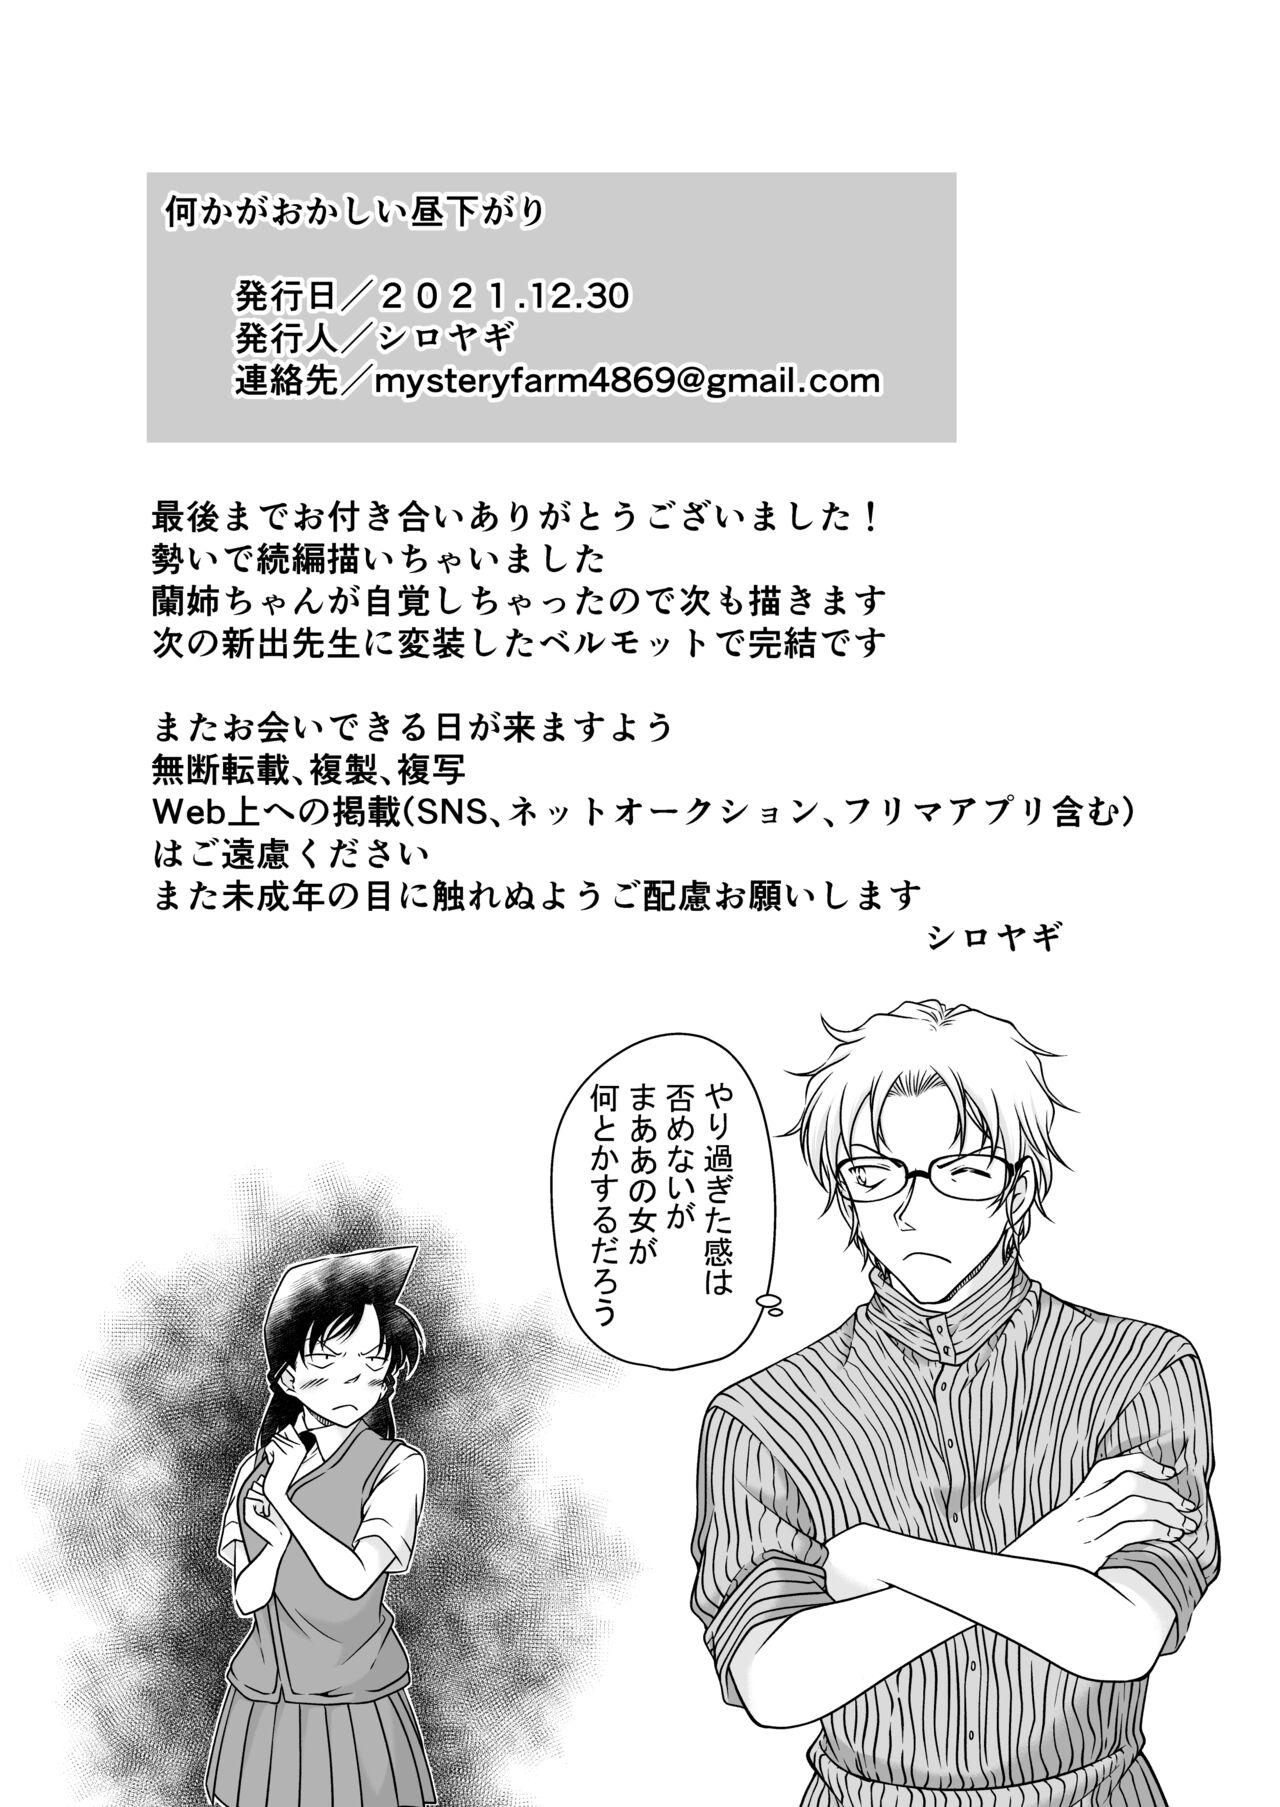 【Detective Conan】Something is wrong in the afternoon 30